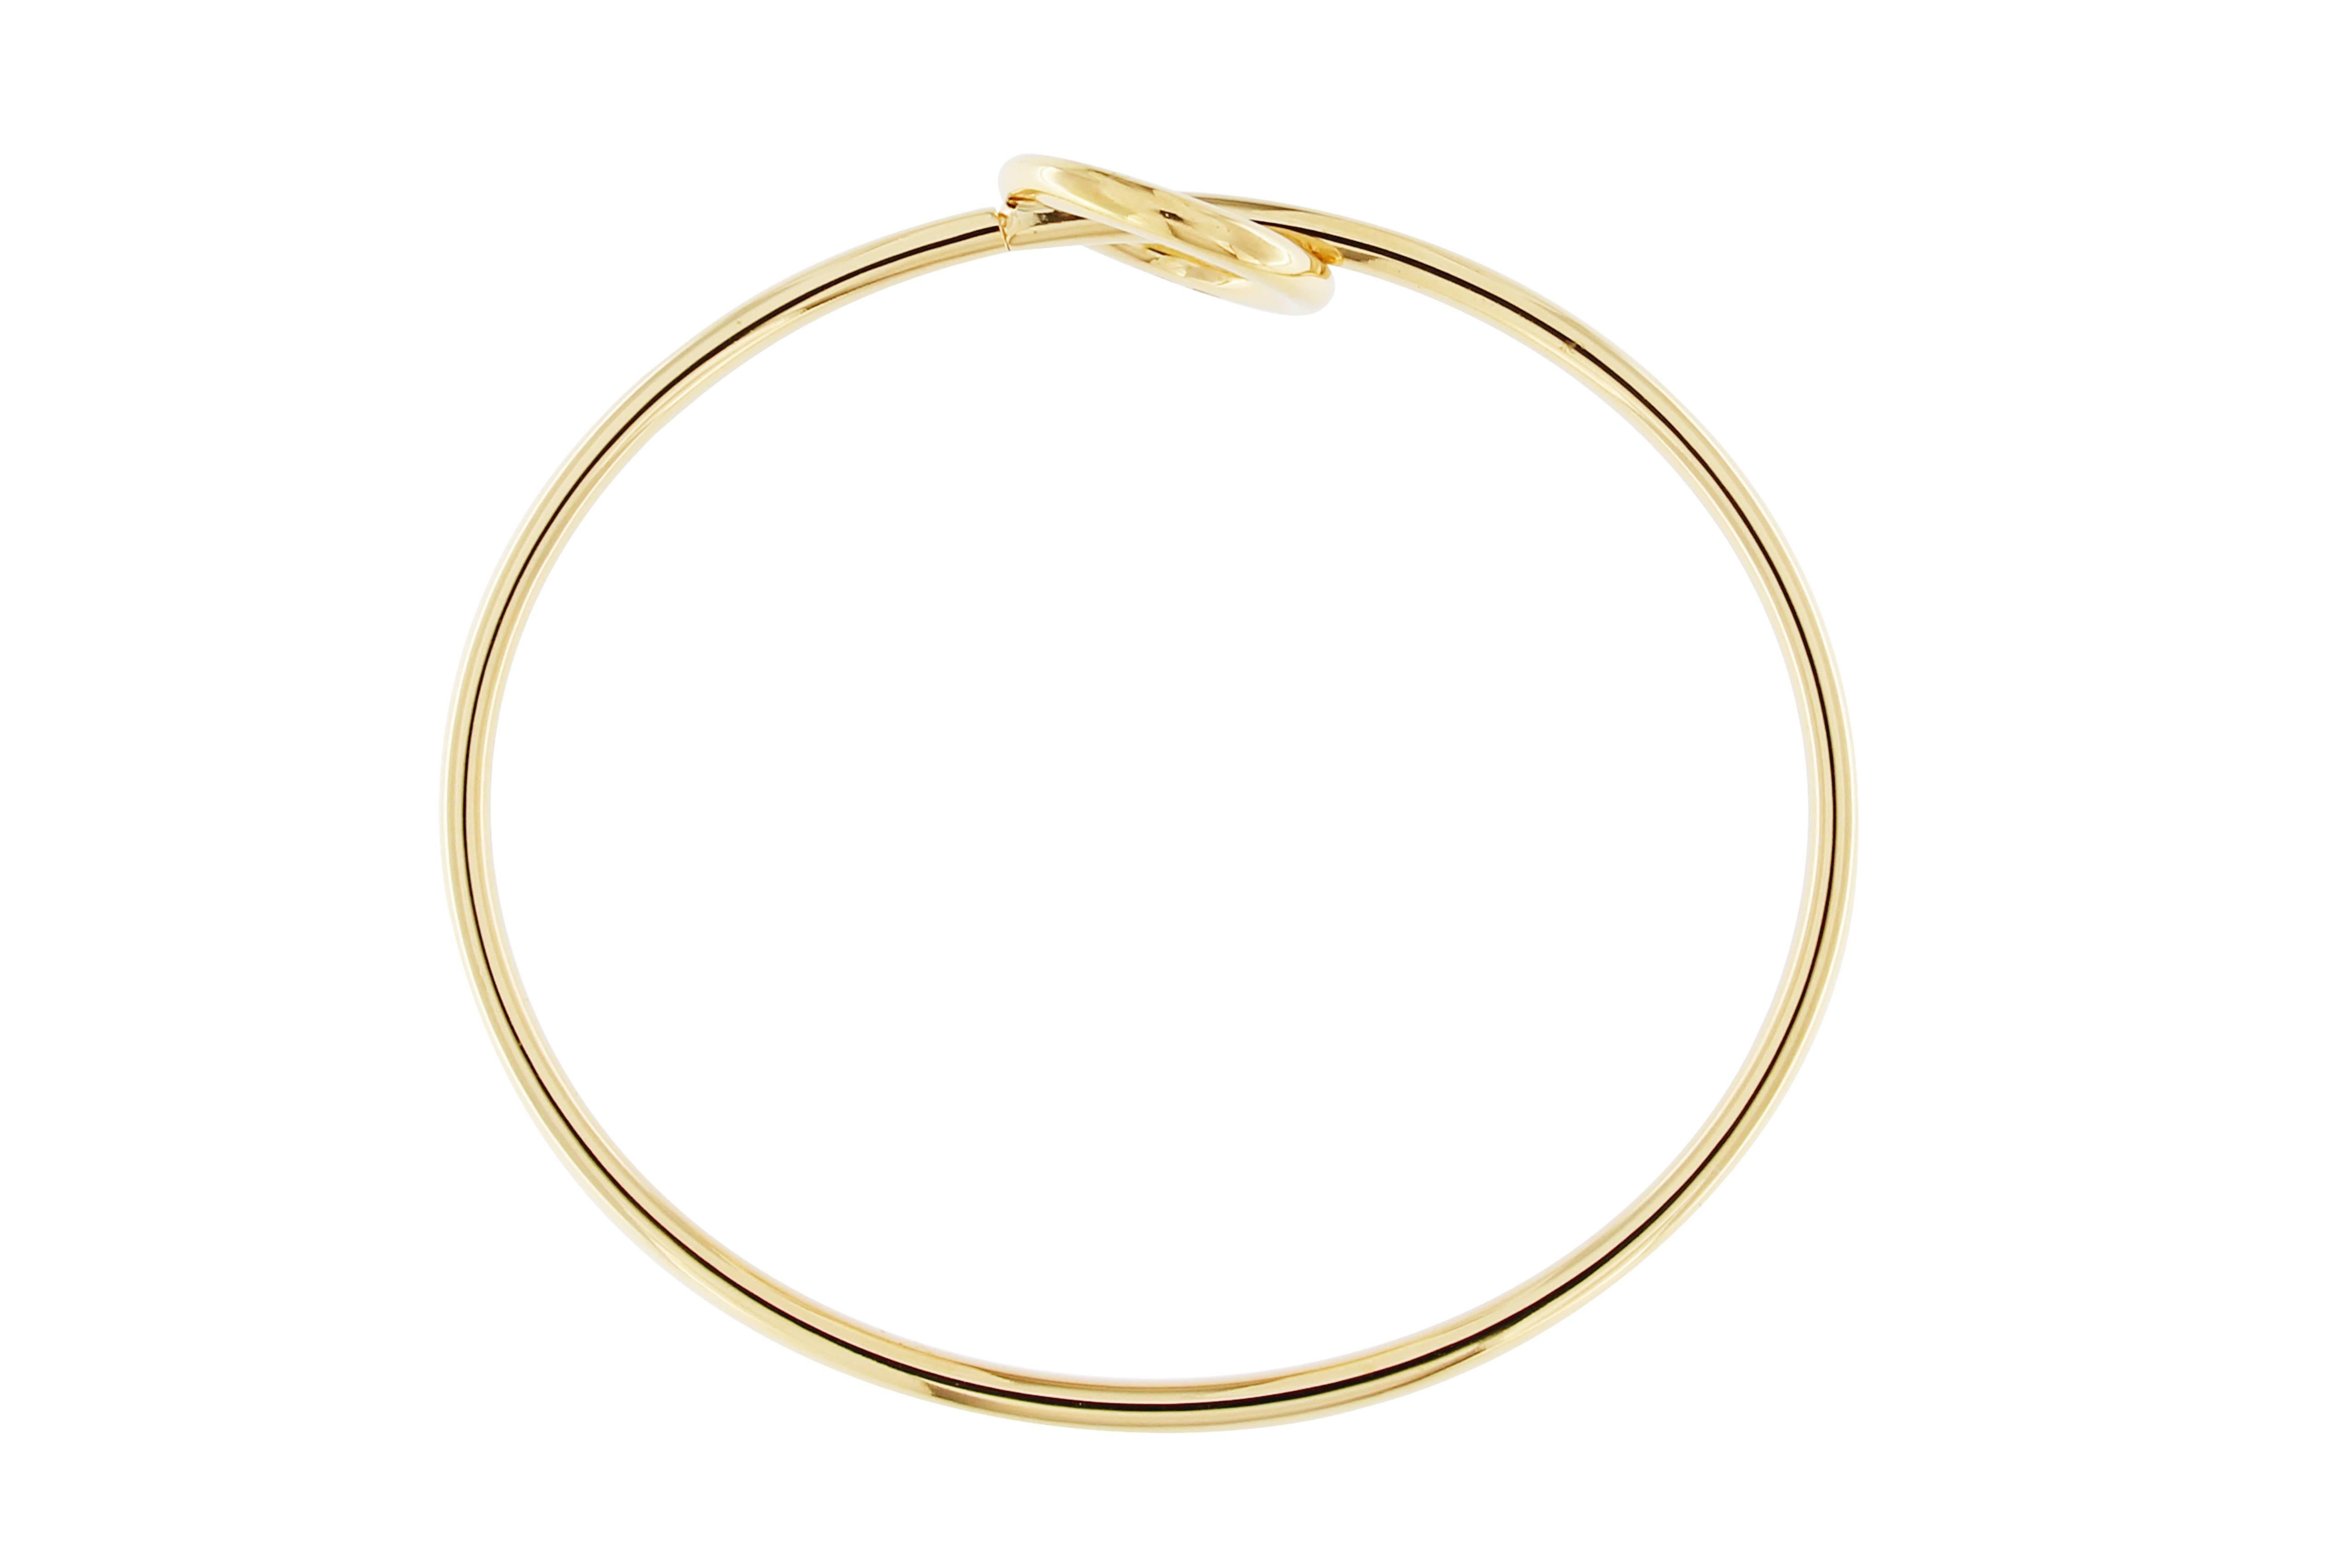 Alex Jona design collection, hand crafted in Italy, 18 karat yellow gold bracelet featuring a central crossing circle element.
Dimensions:
2.14 in. H x 2.43 in. W x 0.62 in. D
55 mm. H x 62 mm. W x 16 mm. D
Alex Jona jewels stand out, not only for